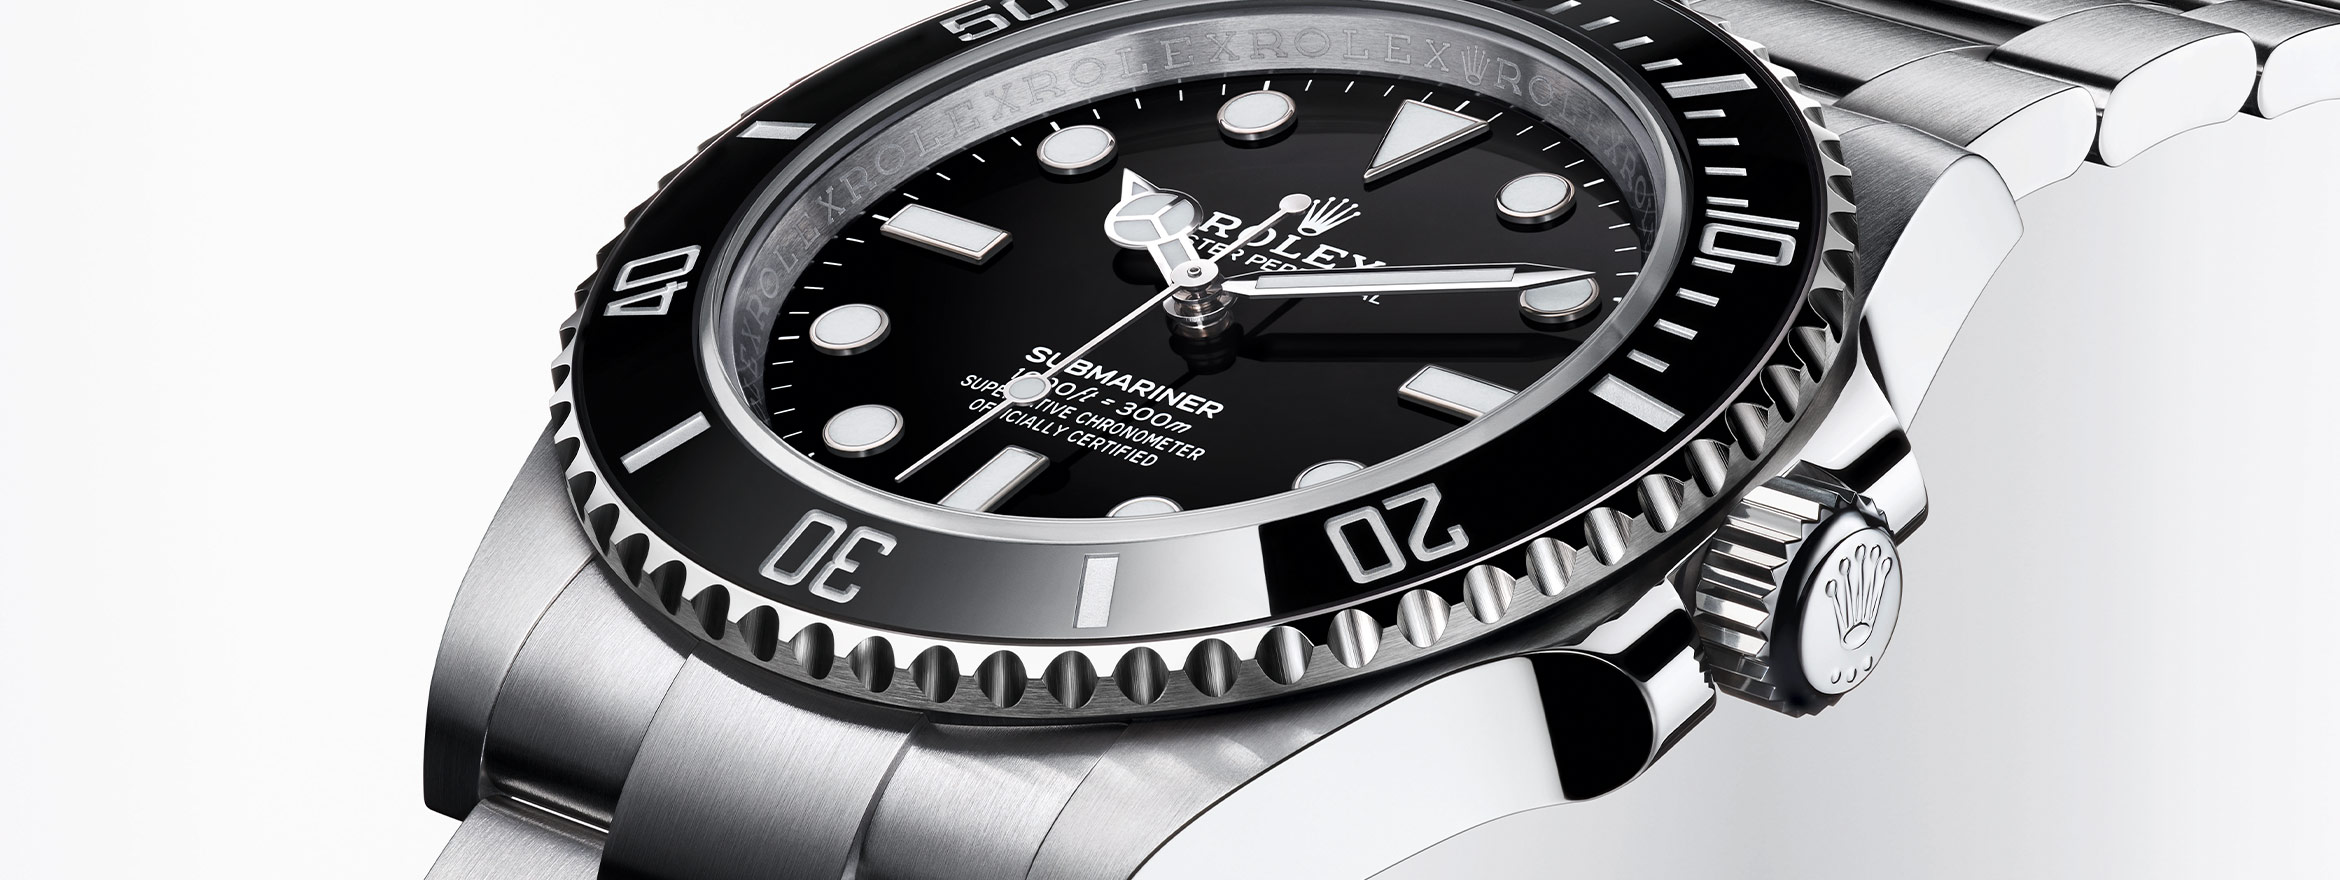 Rolex New Watches 2020: Oyster Perpetual Submariner